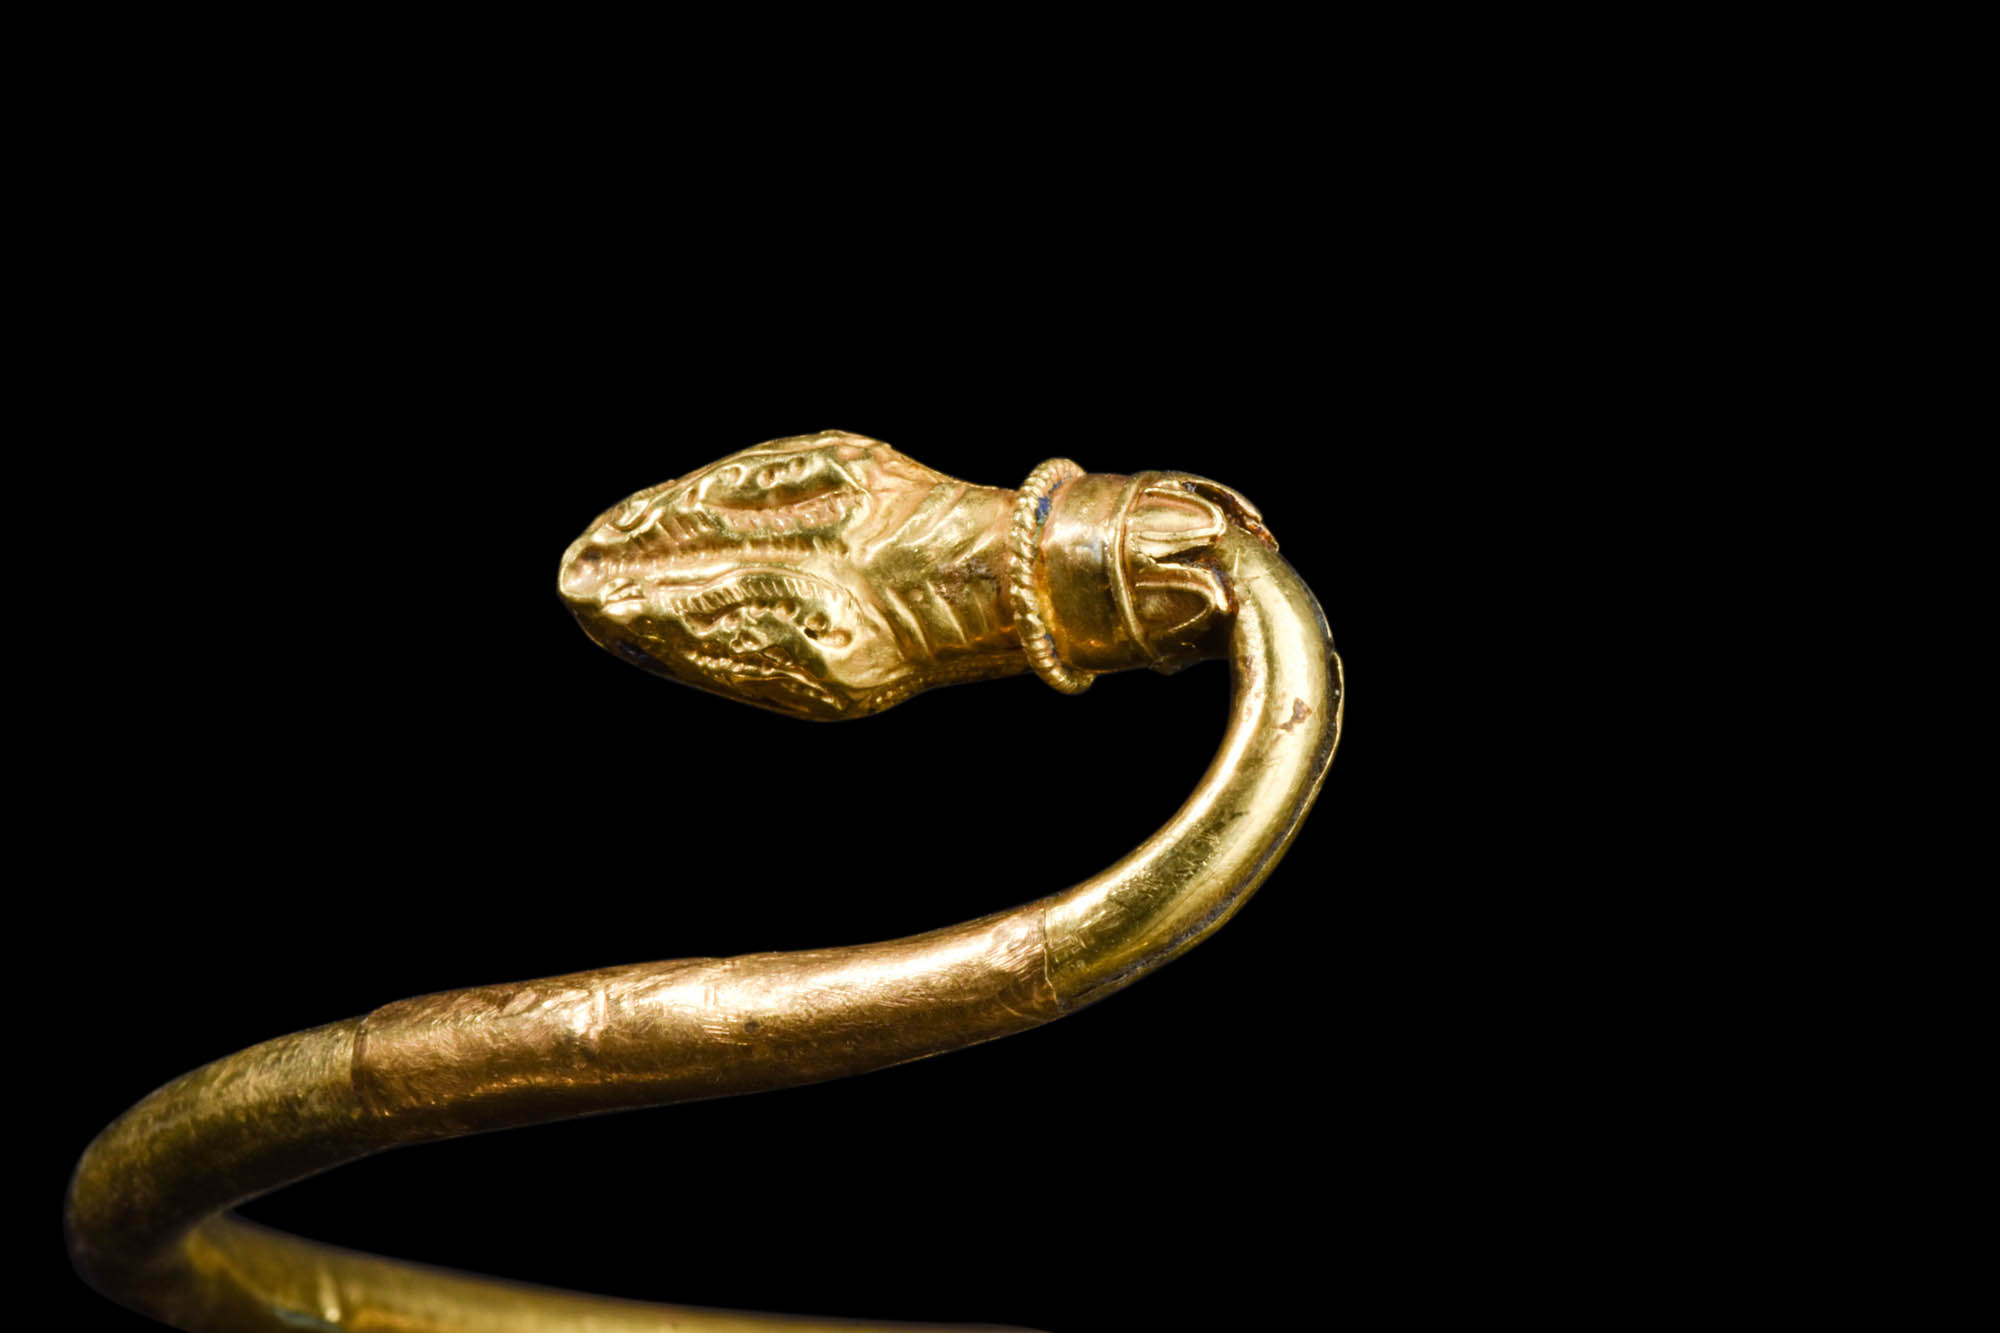 HEAVY PTOLEMAIC GOLD ARM RING - Image 3 of 5